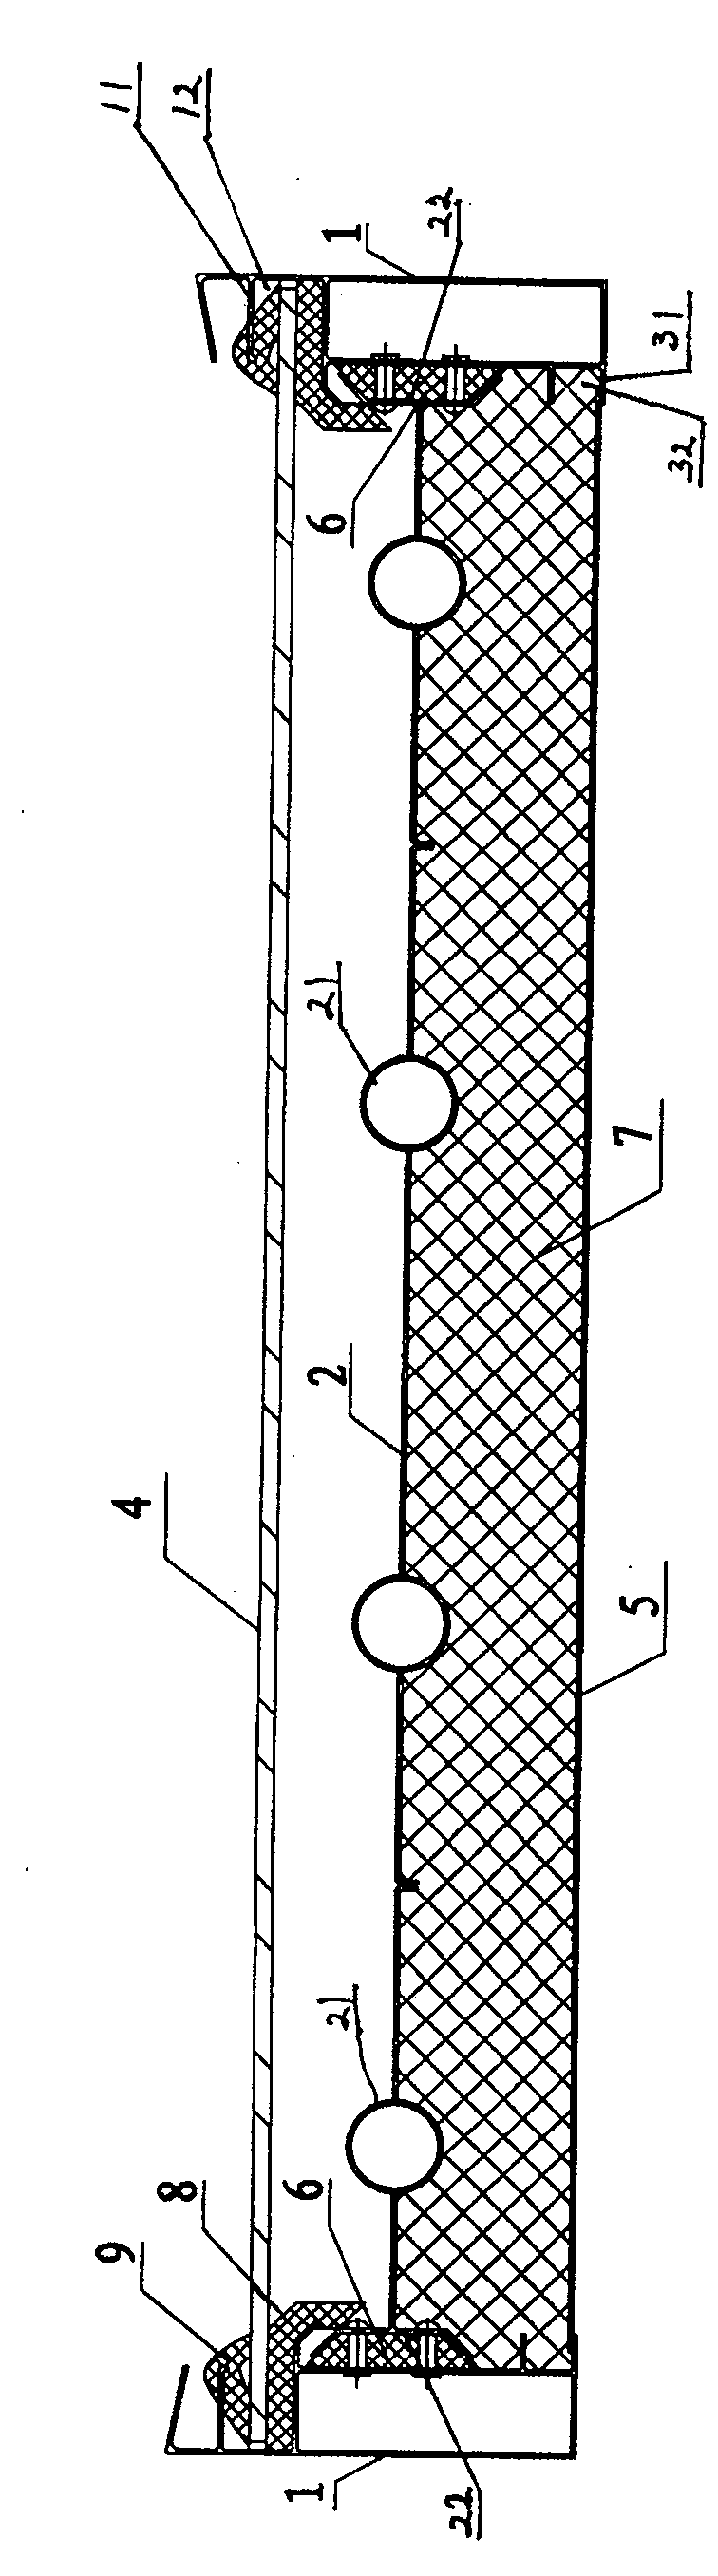 Multi-purpose building element board having solar energy collection function